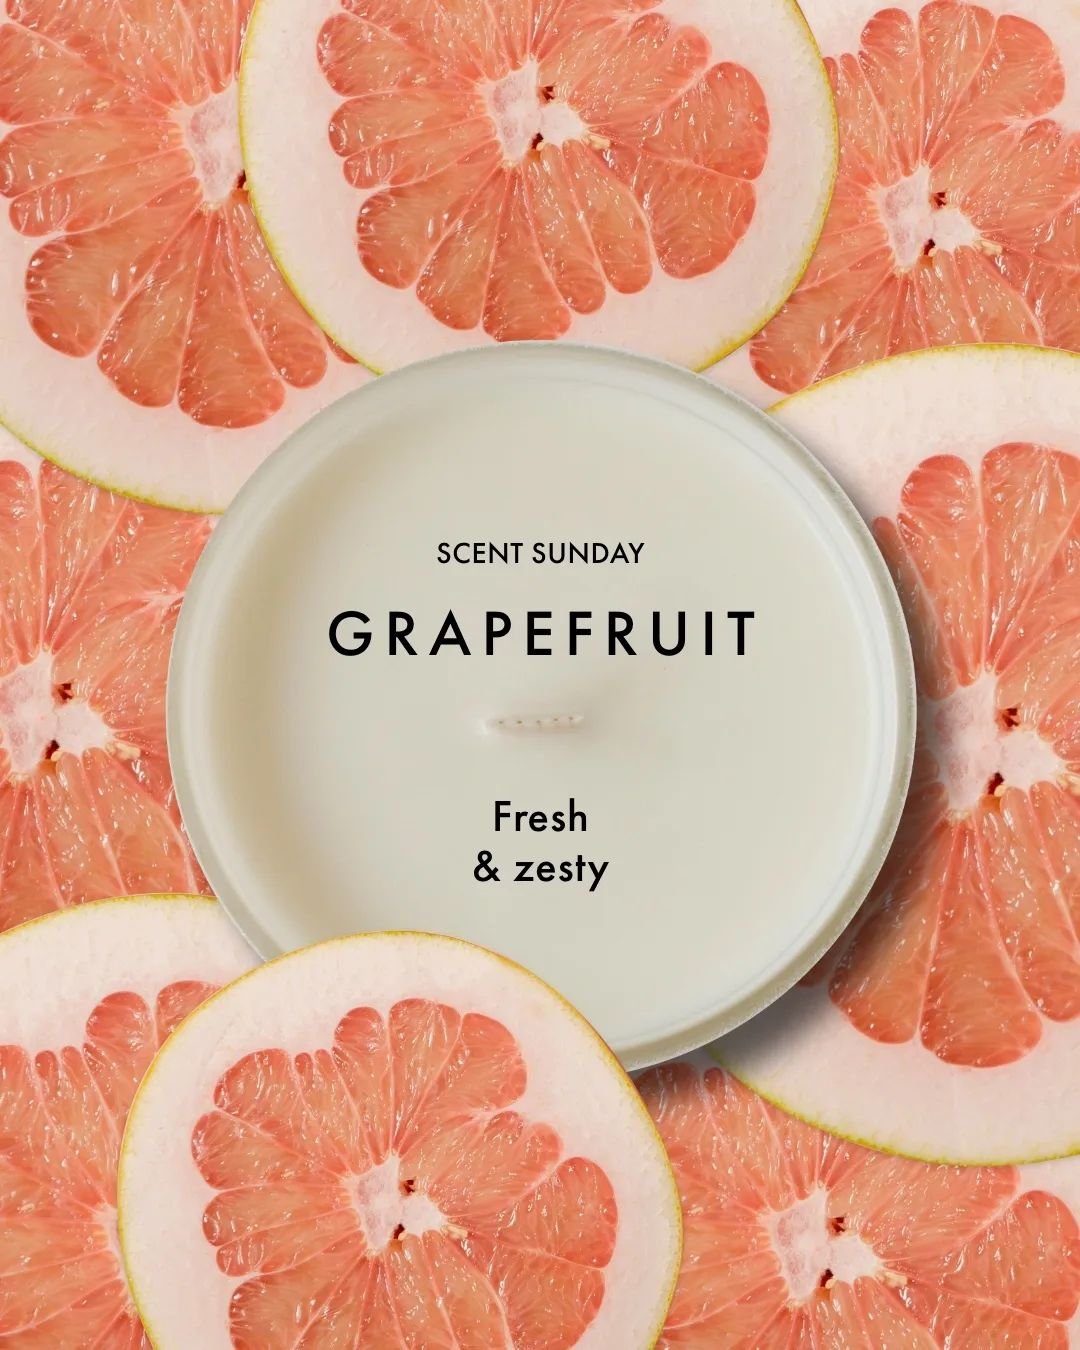 Welcome to Scent Sundays 🌄. On this, Cinco de Mayo, we kick off with one of our favourite morning scents, Grapefruit, which is a fresh and zesty candle with fruity top notes alongside the more earthy base notes of vetiver, patchouli and oakmoss.

Cu